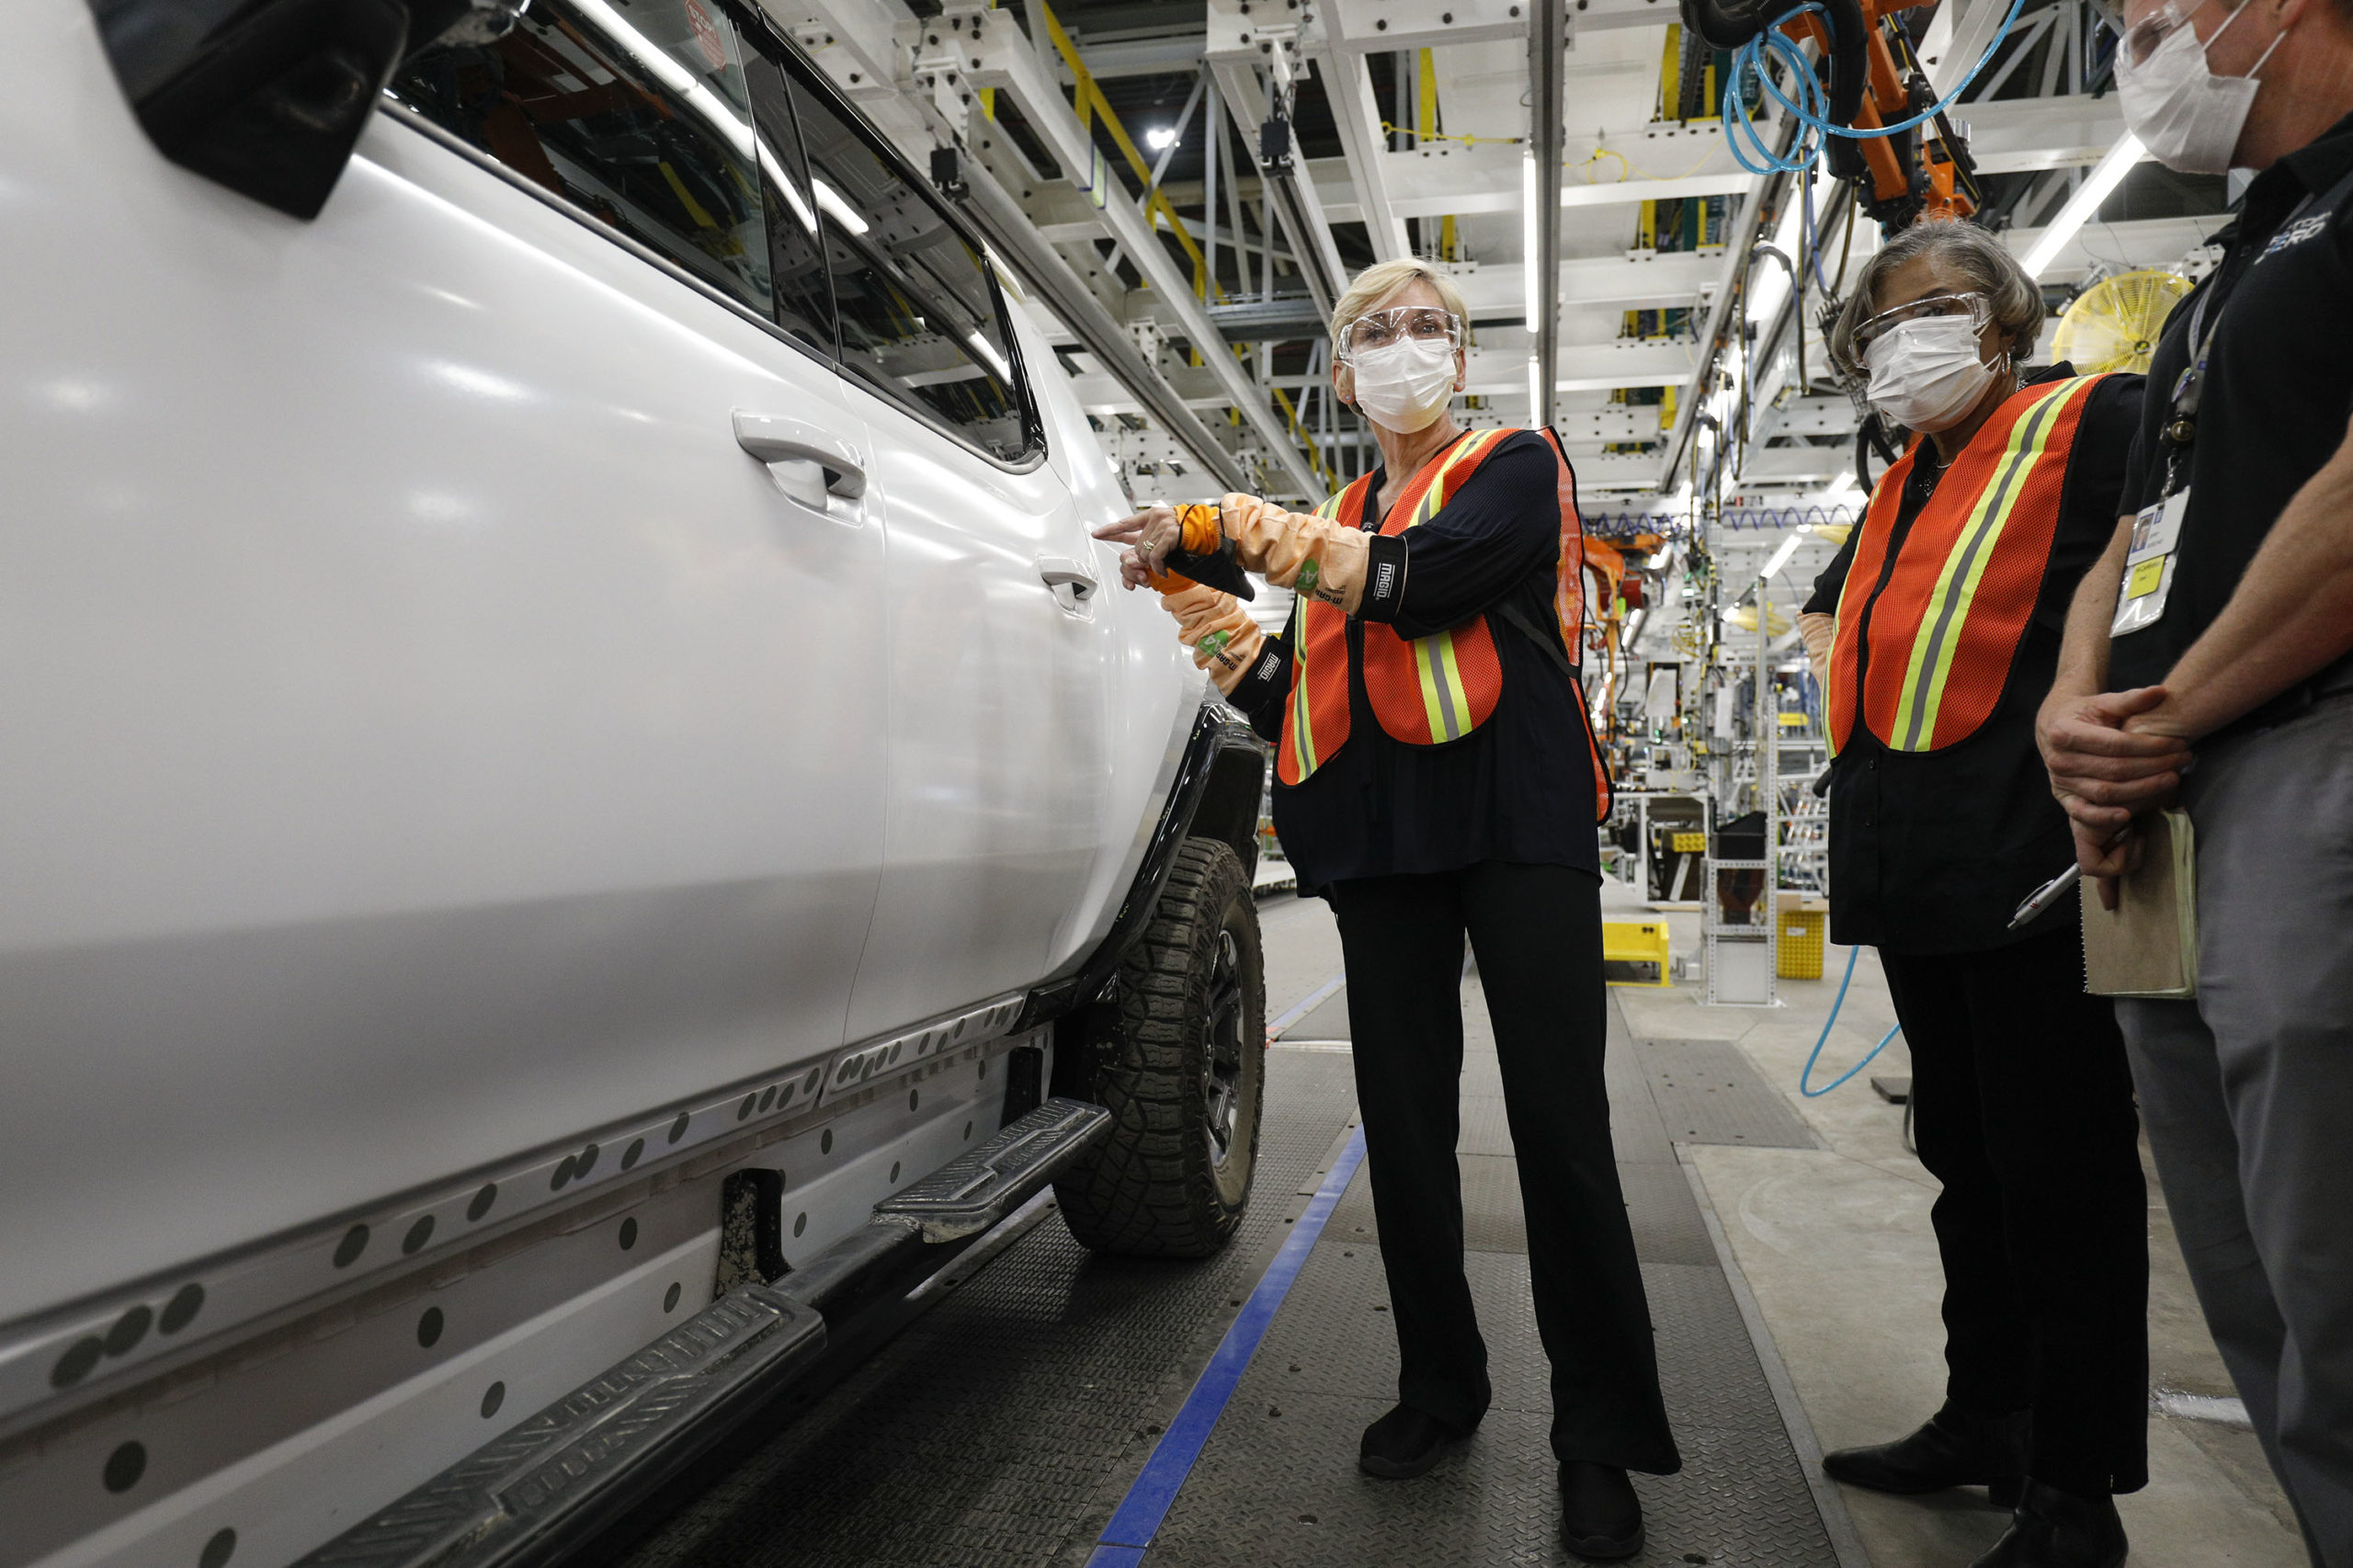 Secretary of Energy Jennifer Granholm examines a General Motors Hummer electric truck at GM Factory Zero on Aug. 5 in Detroit, Michigan. (Bill Pugliano/Getty Images)